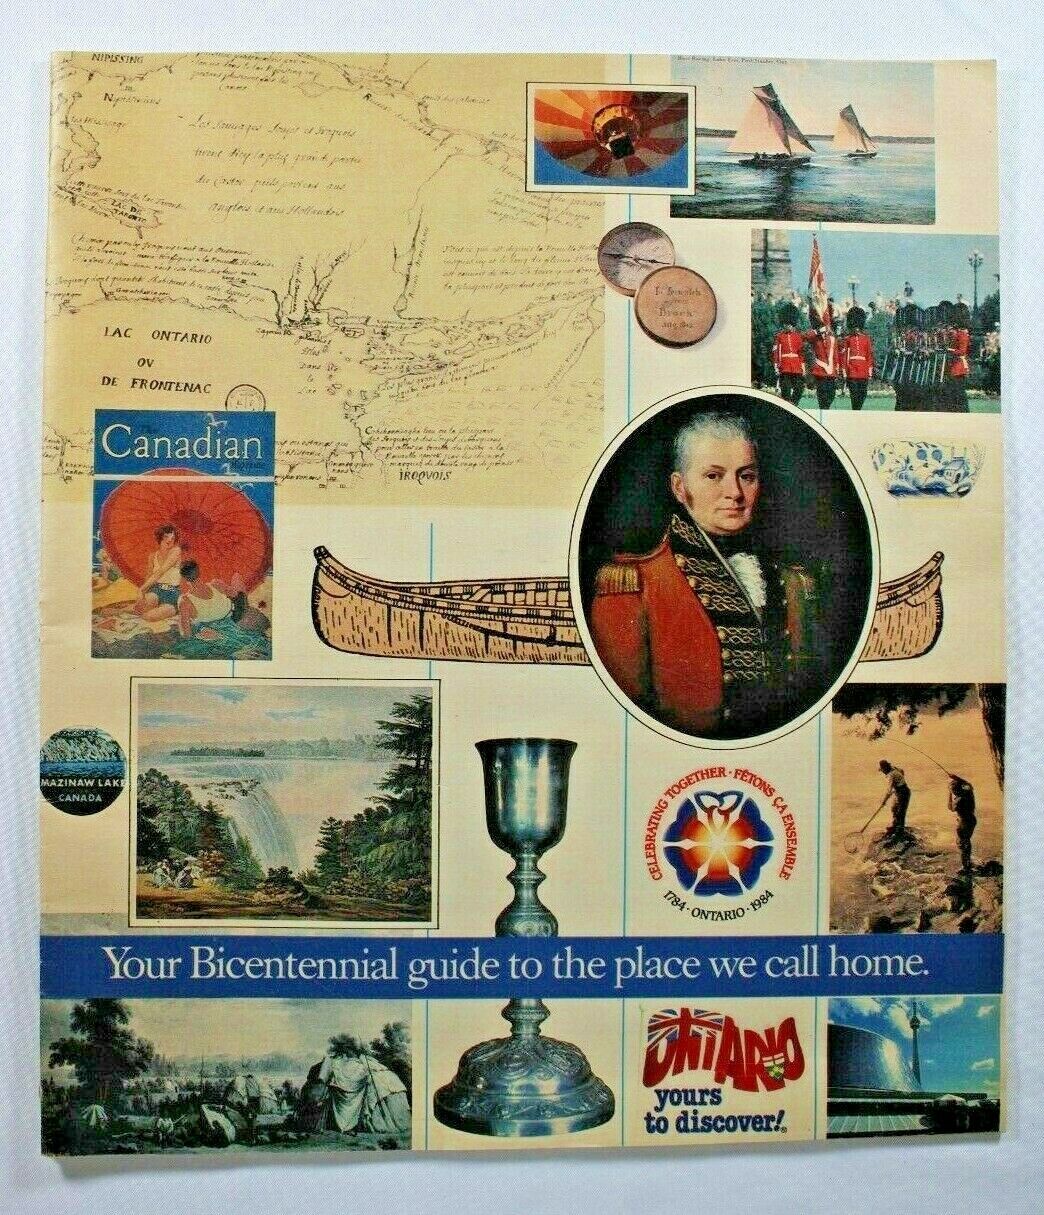 Vintage Ontario Bicentennial 1984 Bicentennial Guide The Place We Call Home g30